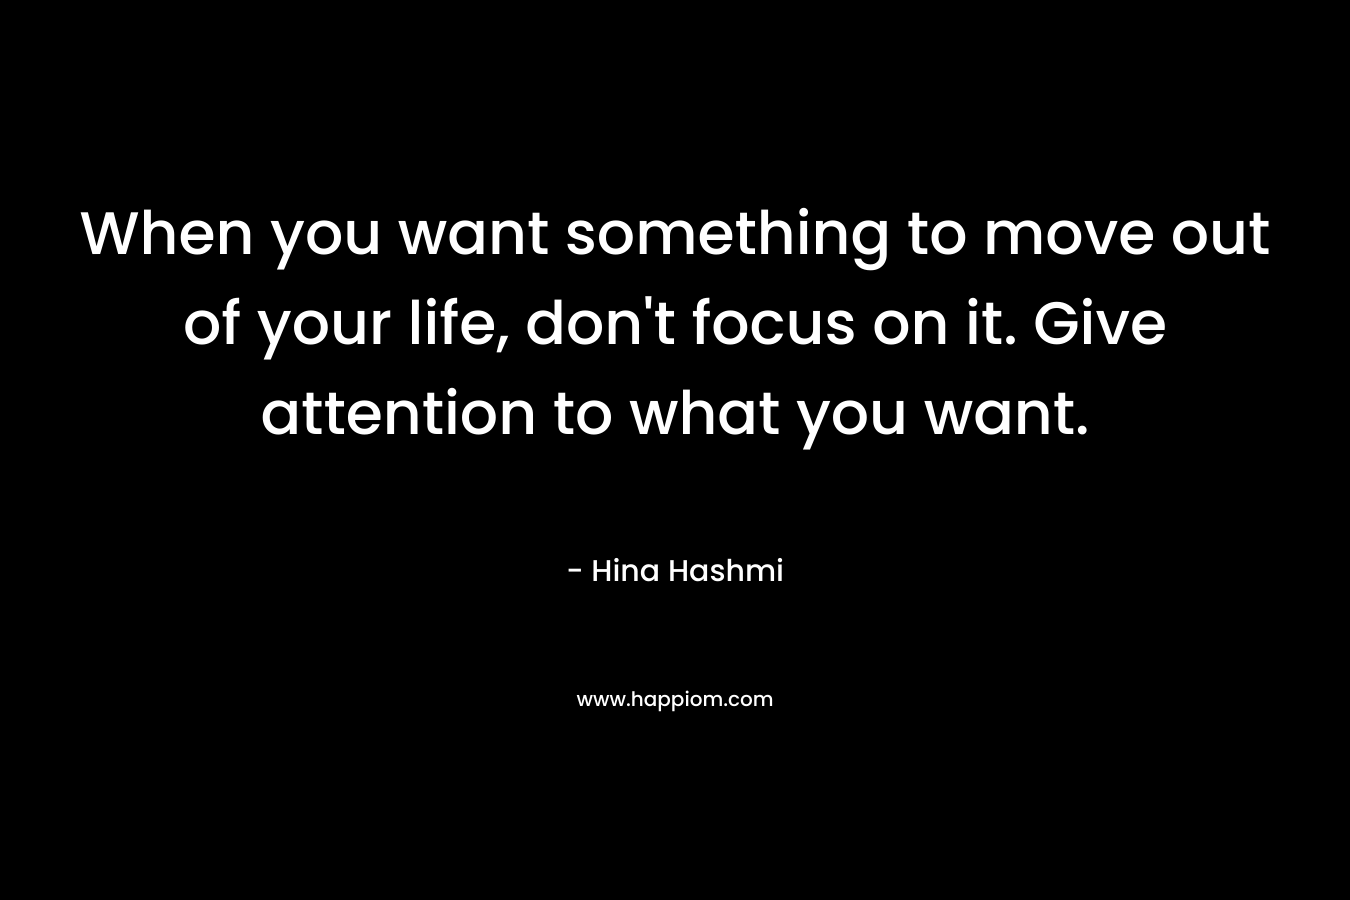 When you want something to move out of your life, don’t focus on it. Give attention to what you want. – Hina Hashmi